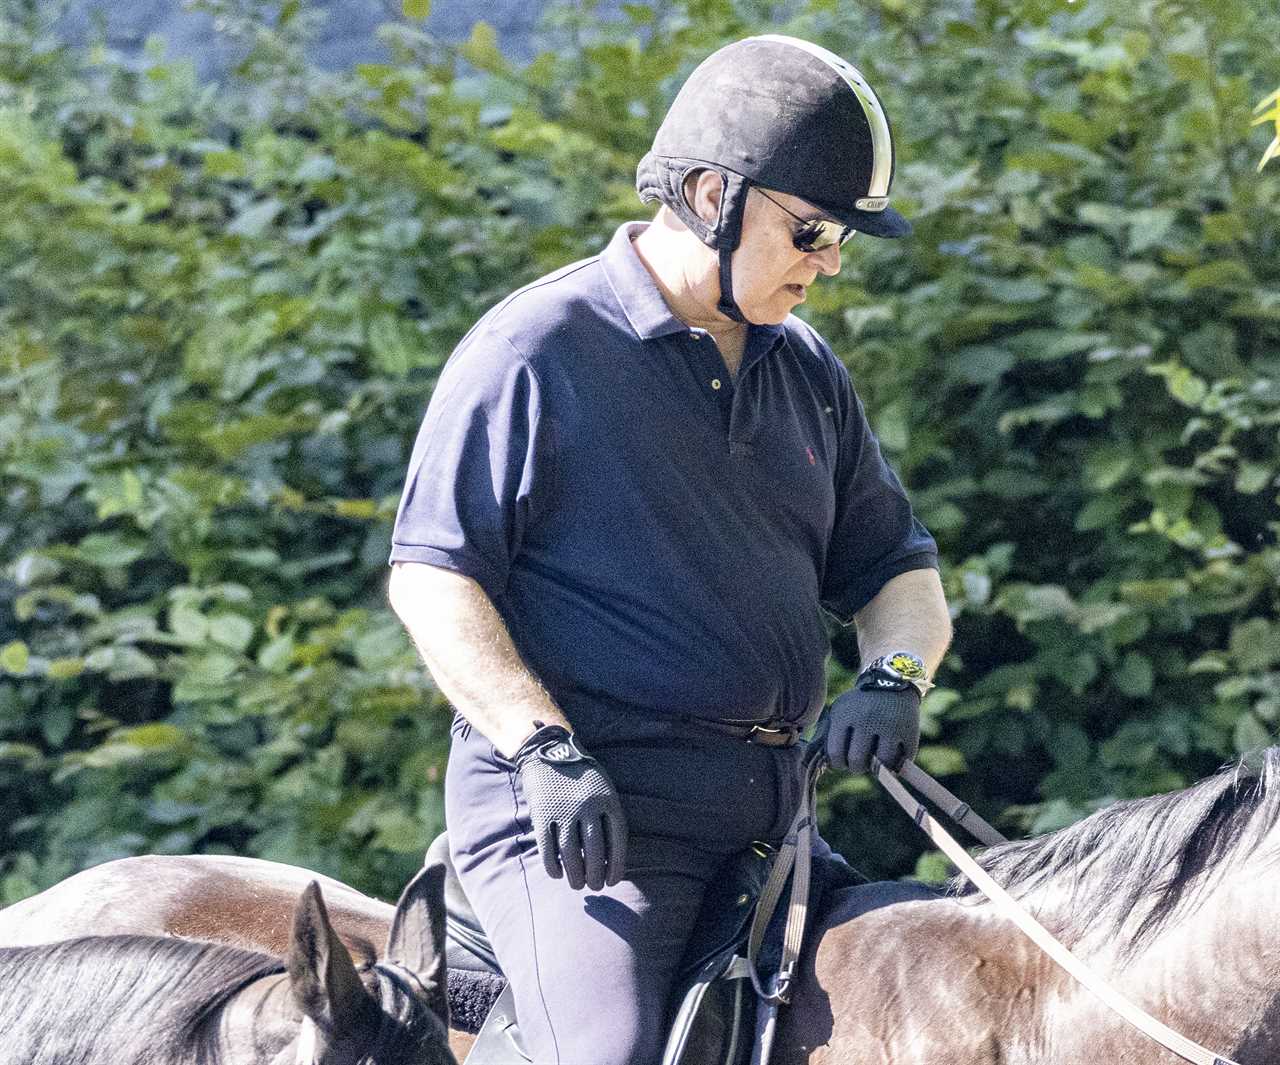 Stony-faced Prince Andrew goes riding at Windsor amid reports his car-crash interview is being turned into a movie